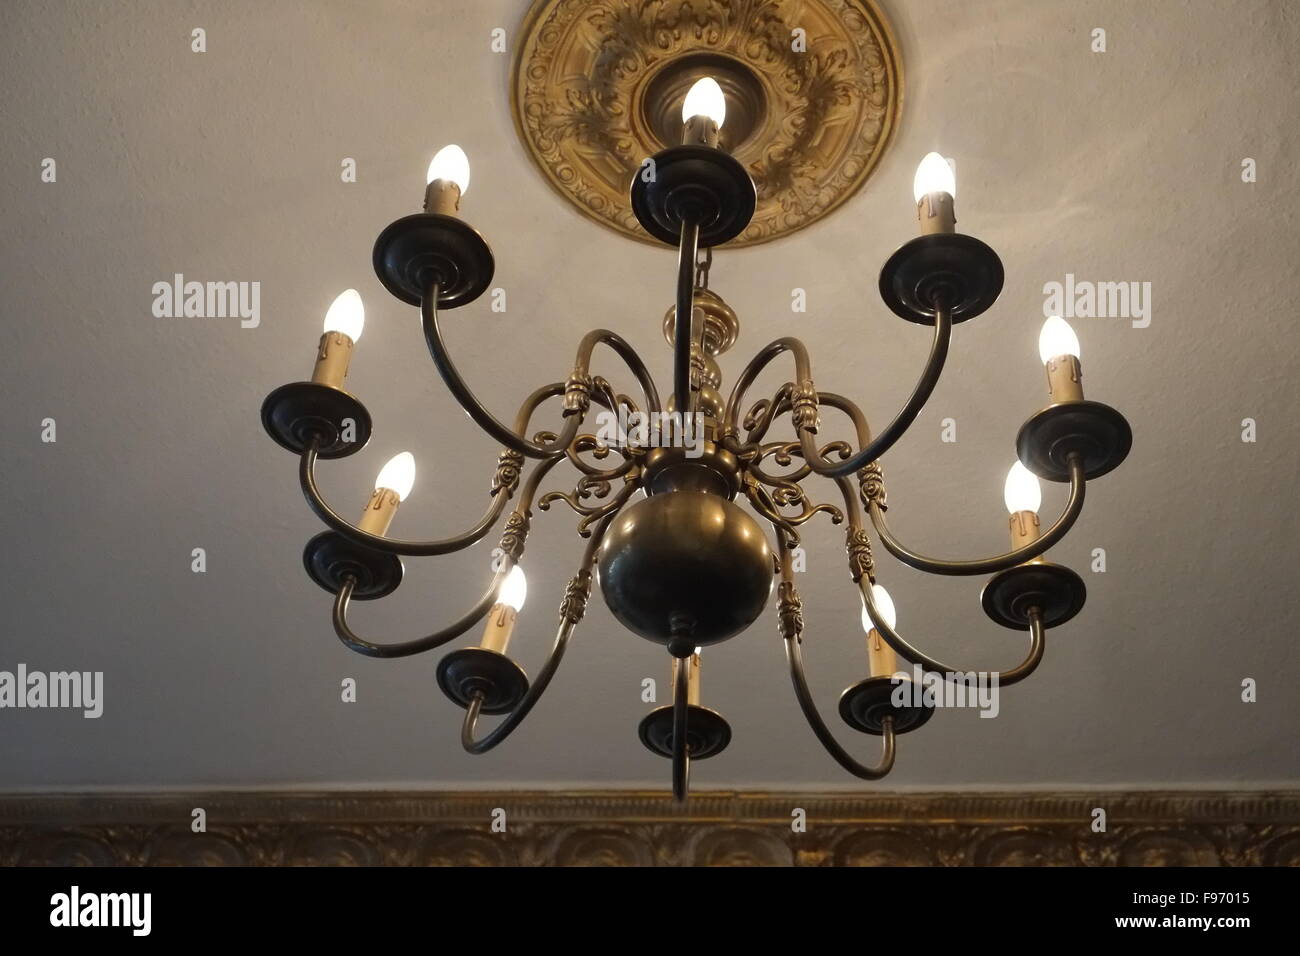 Chandelier With Light Bulbs Projecting Light Stock Photo